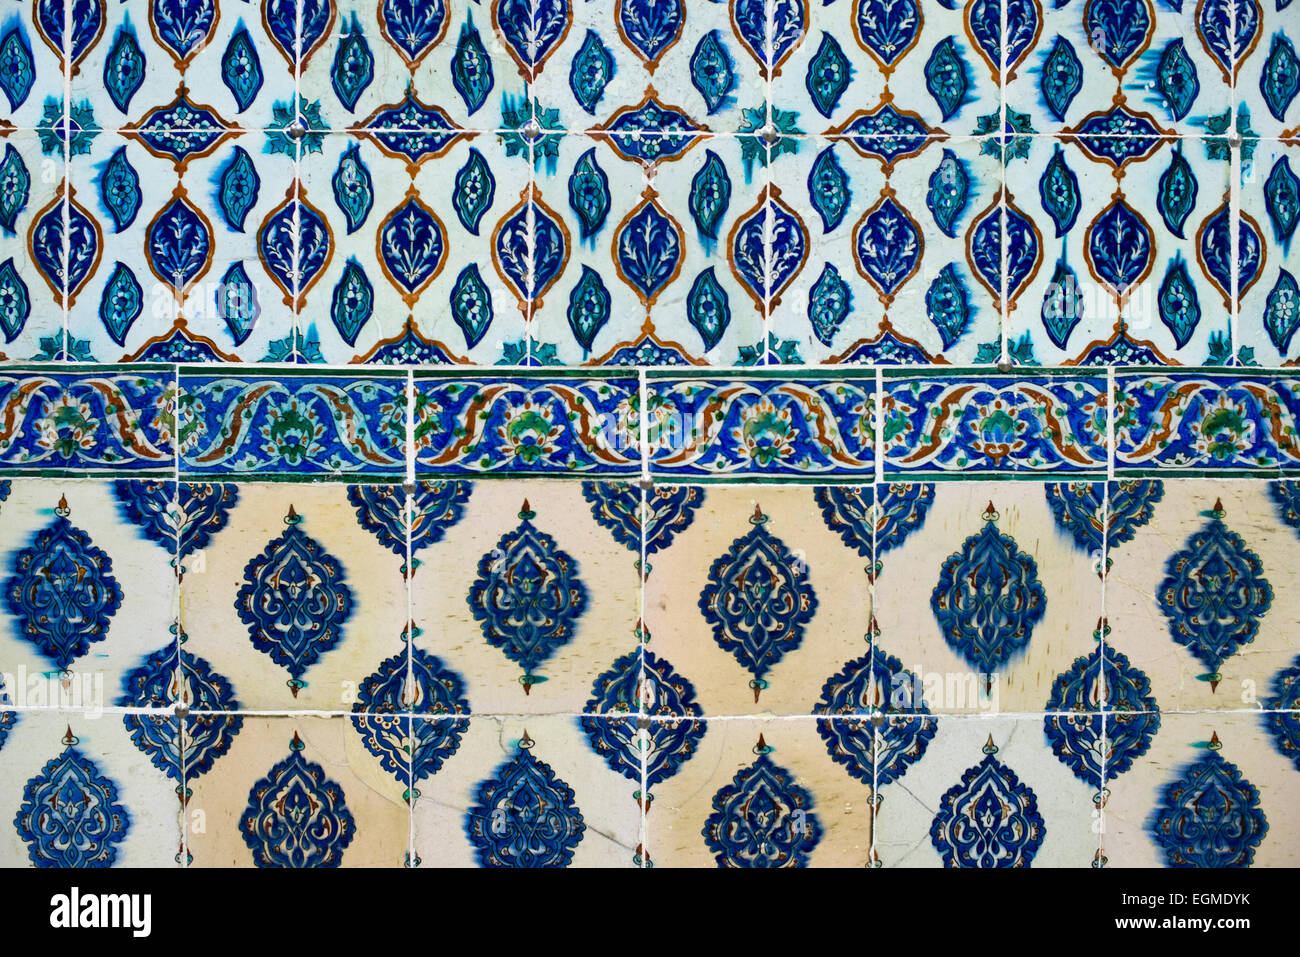 ISTANBUL, Turkey (Türkiye) — Ornate tiles decorating the walls of the Harem Mosque at Topkapi Palace. The Harem Mosque (Harem Mescidi) of Topkapi Palace was built in the 17th century as a prayer hall for the sultan's mother, daughters, and first consort, as well as senior women of the harem. The Imperial Harem was the inner sanctum of the Topkapi Palace where the Sultan and his family lived. Standing on a peninsular overlooking the Bosphorus Strait and Golden Horn, Topkapi Palace was the primary residence of the Ottoman sultans for approximately 400 years (1465–1856) of their 624-year reign. Stock Photo